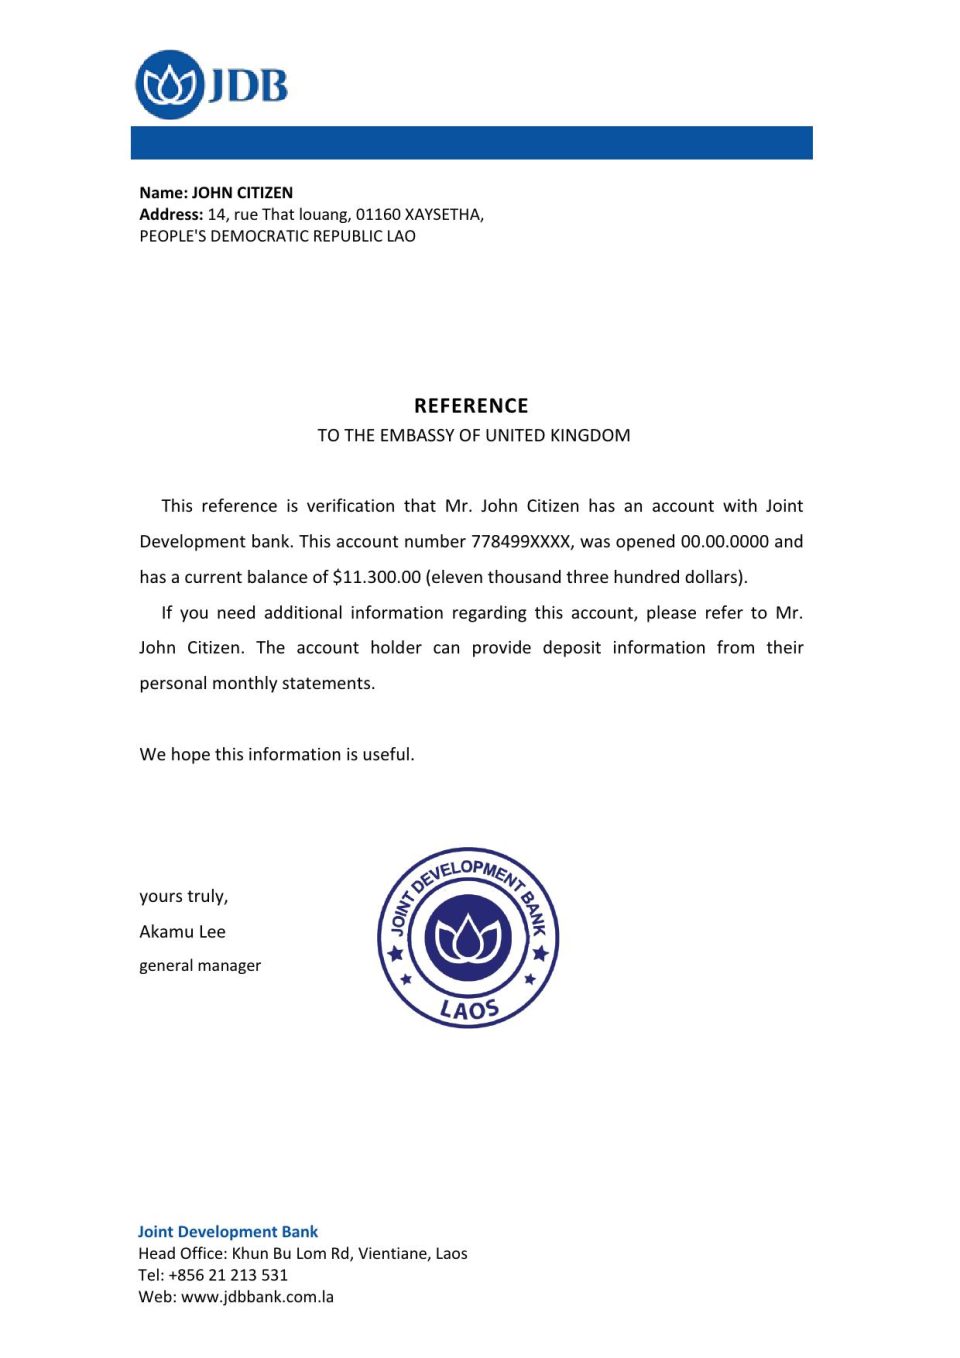 Download Laos Joint Development Bank Reference Letter Templates | Editable Word